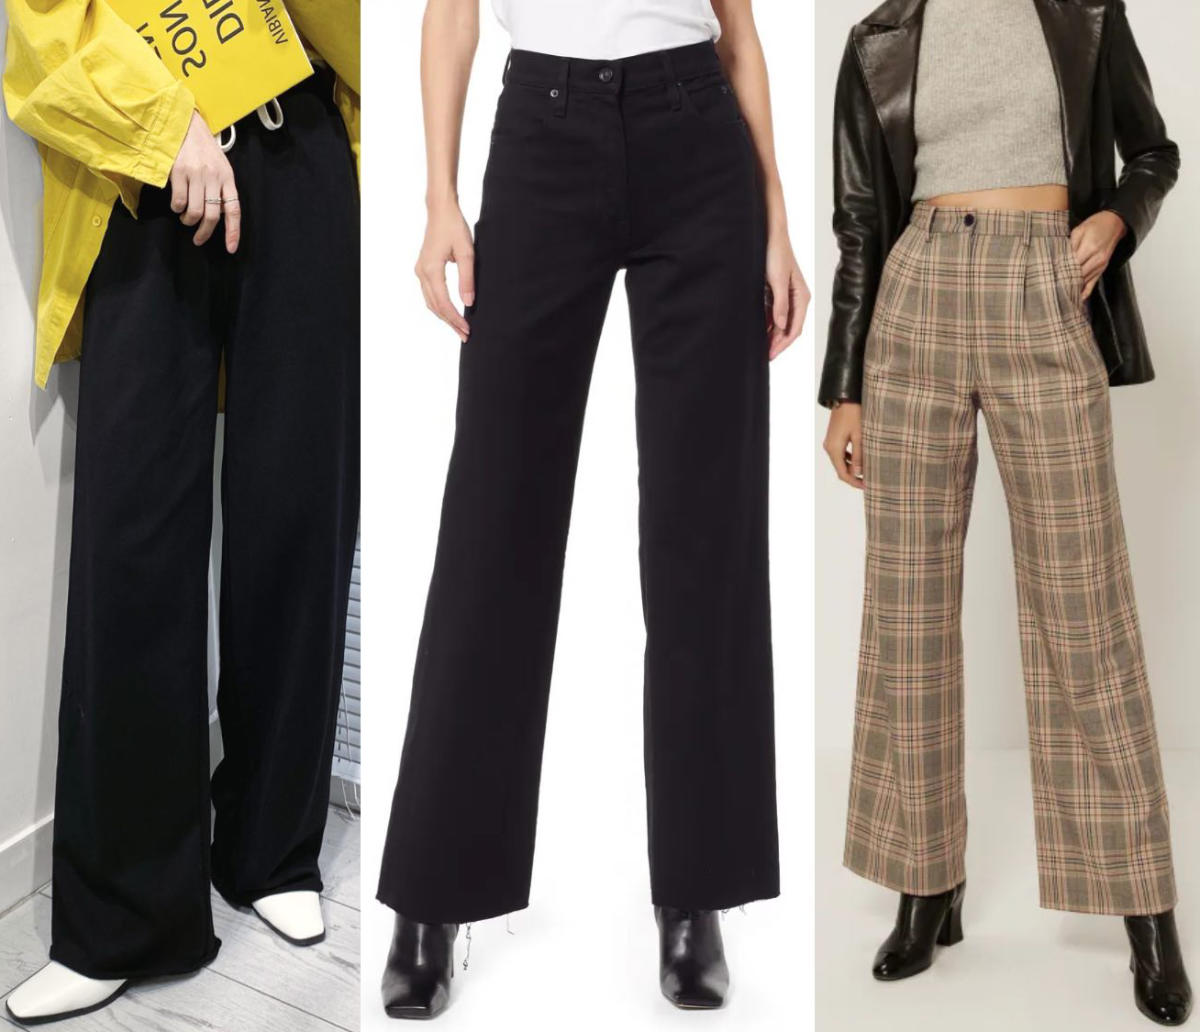 5 Chic Shoes to Wear with WideLeg Pants  PureWow